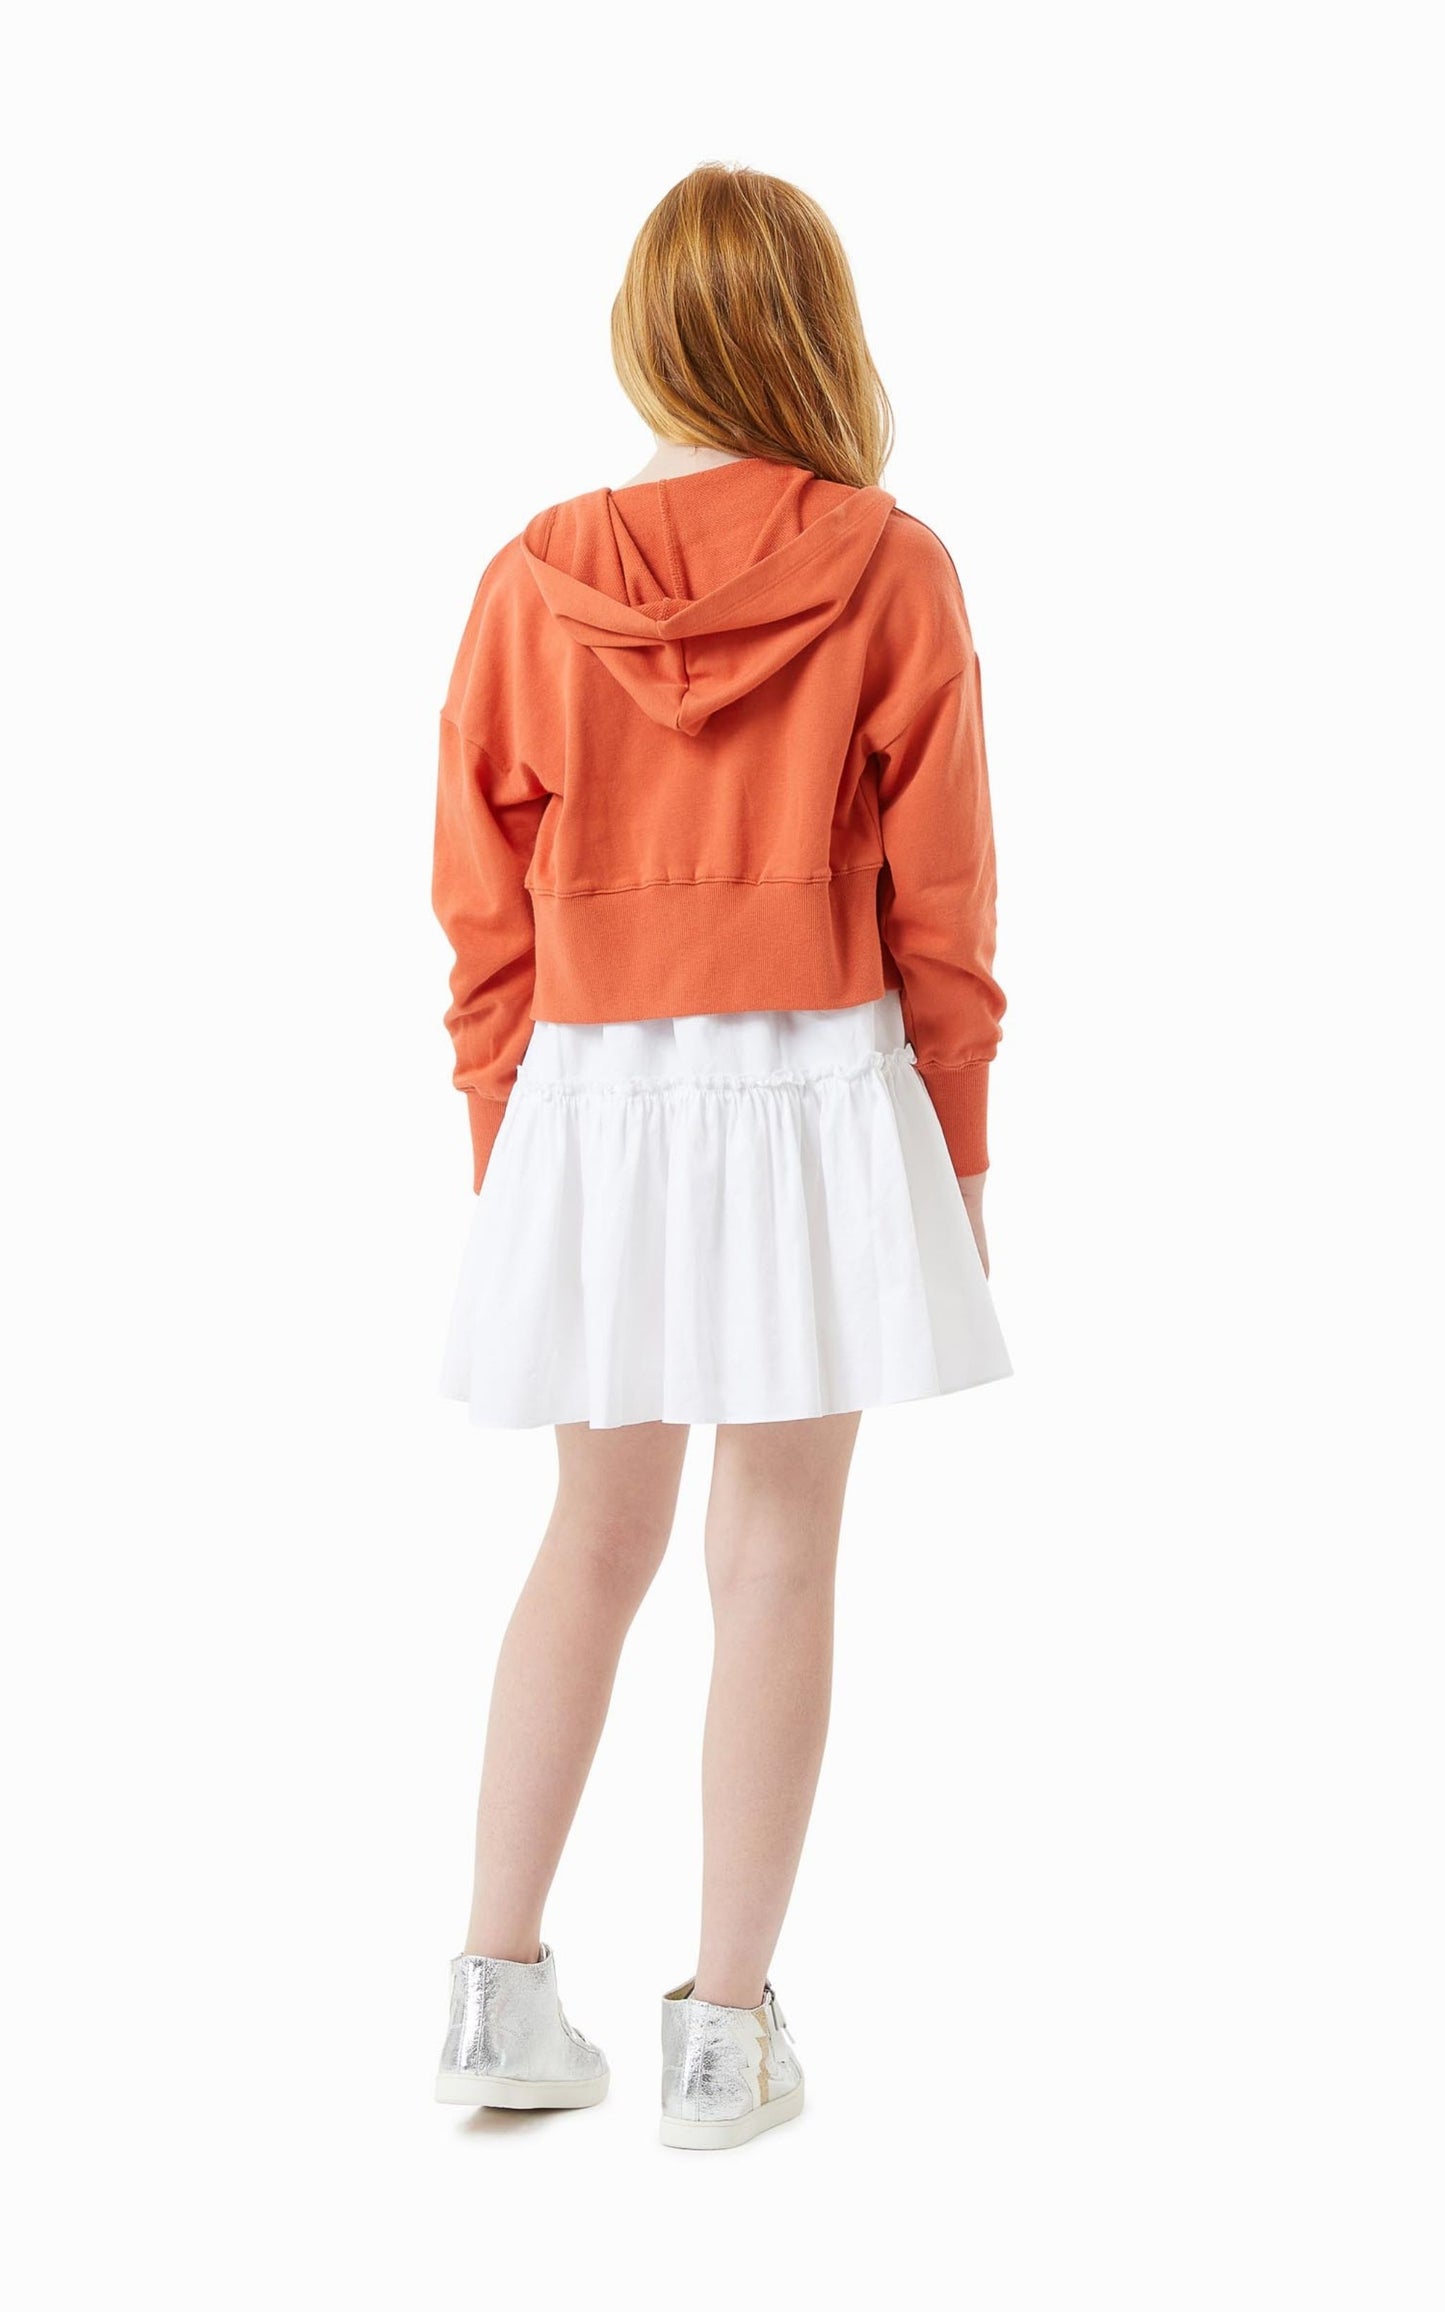 Back view Pre-teen Child in a White Mid-Thigh Summer Dress and Orange Zip up hoodie 